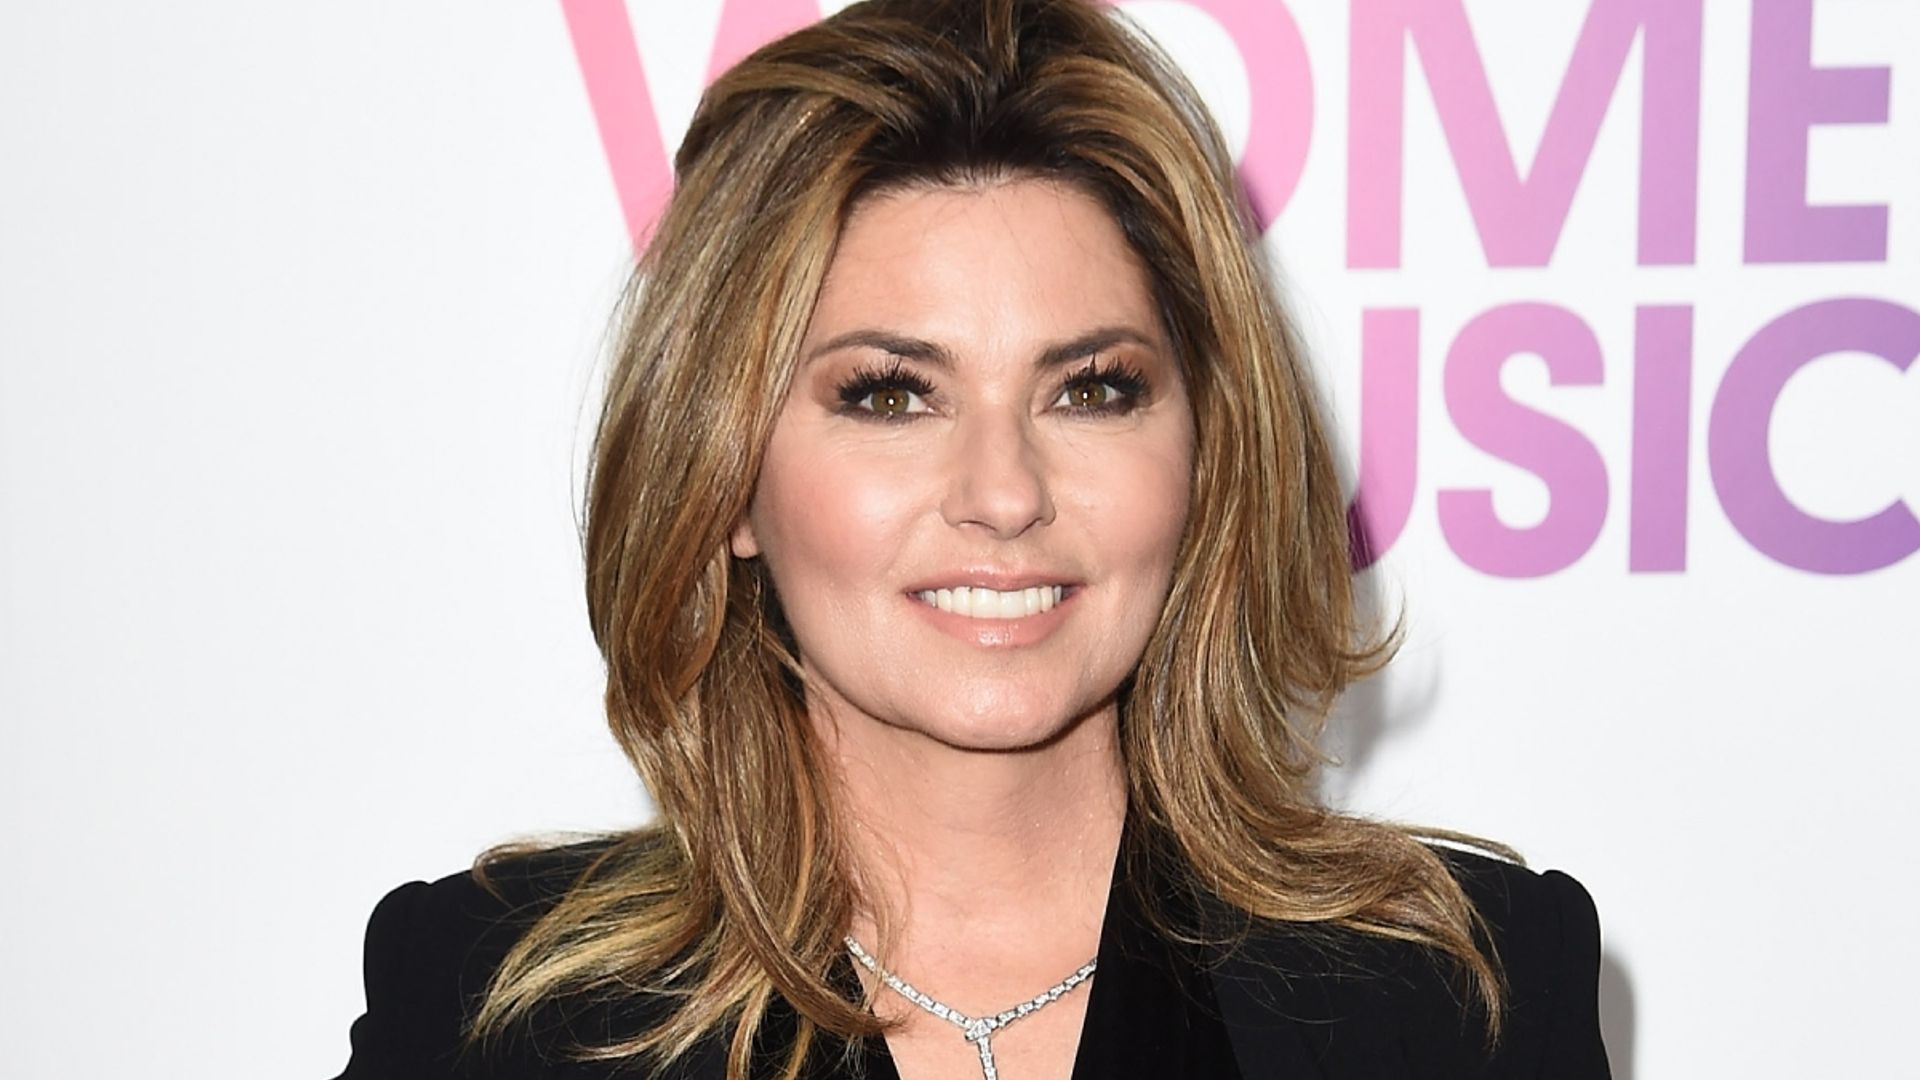 Shania Twain brings the country glamor in shimmery outfit as she shares exciting news